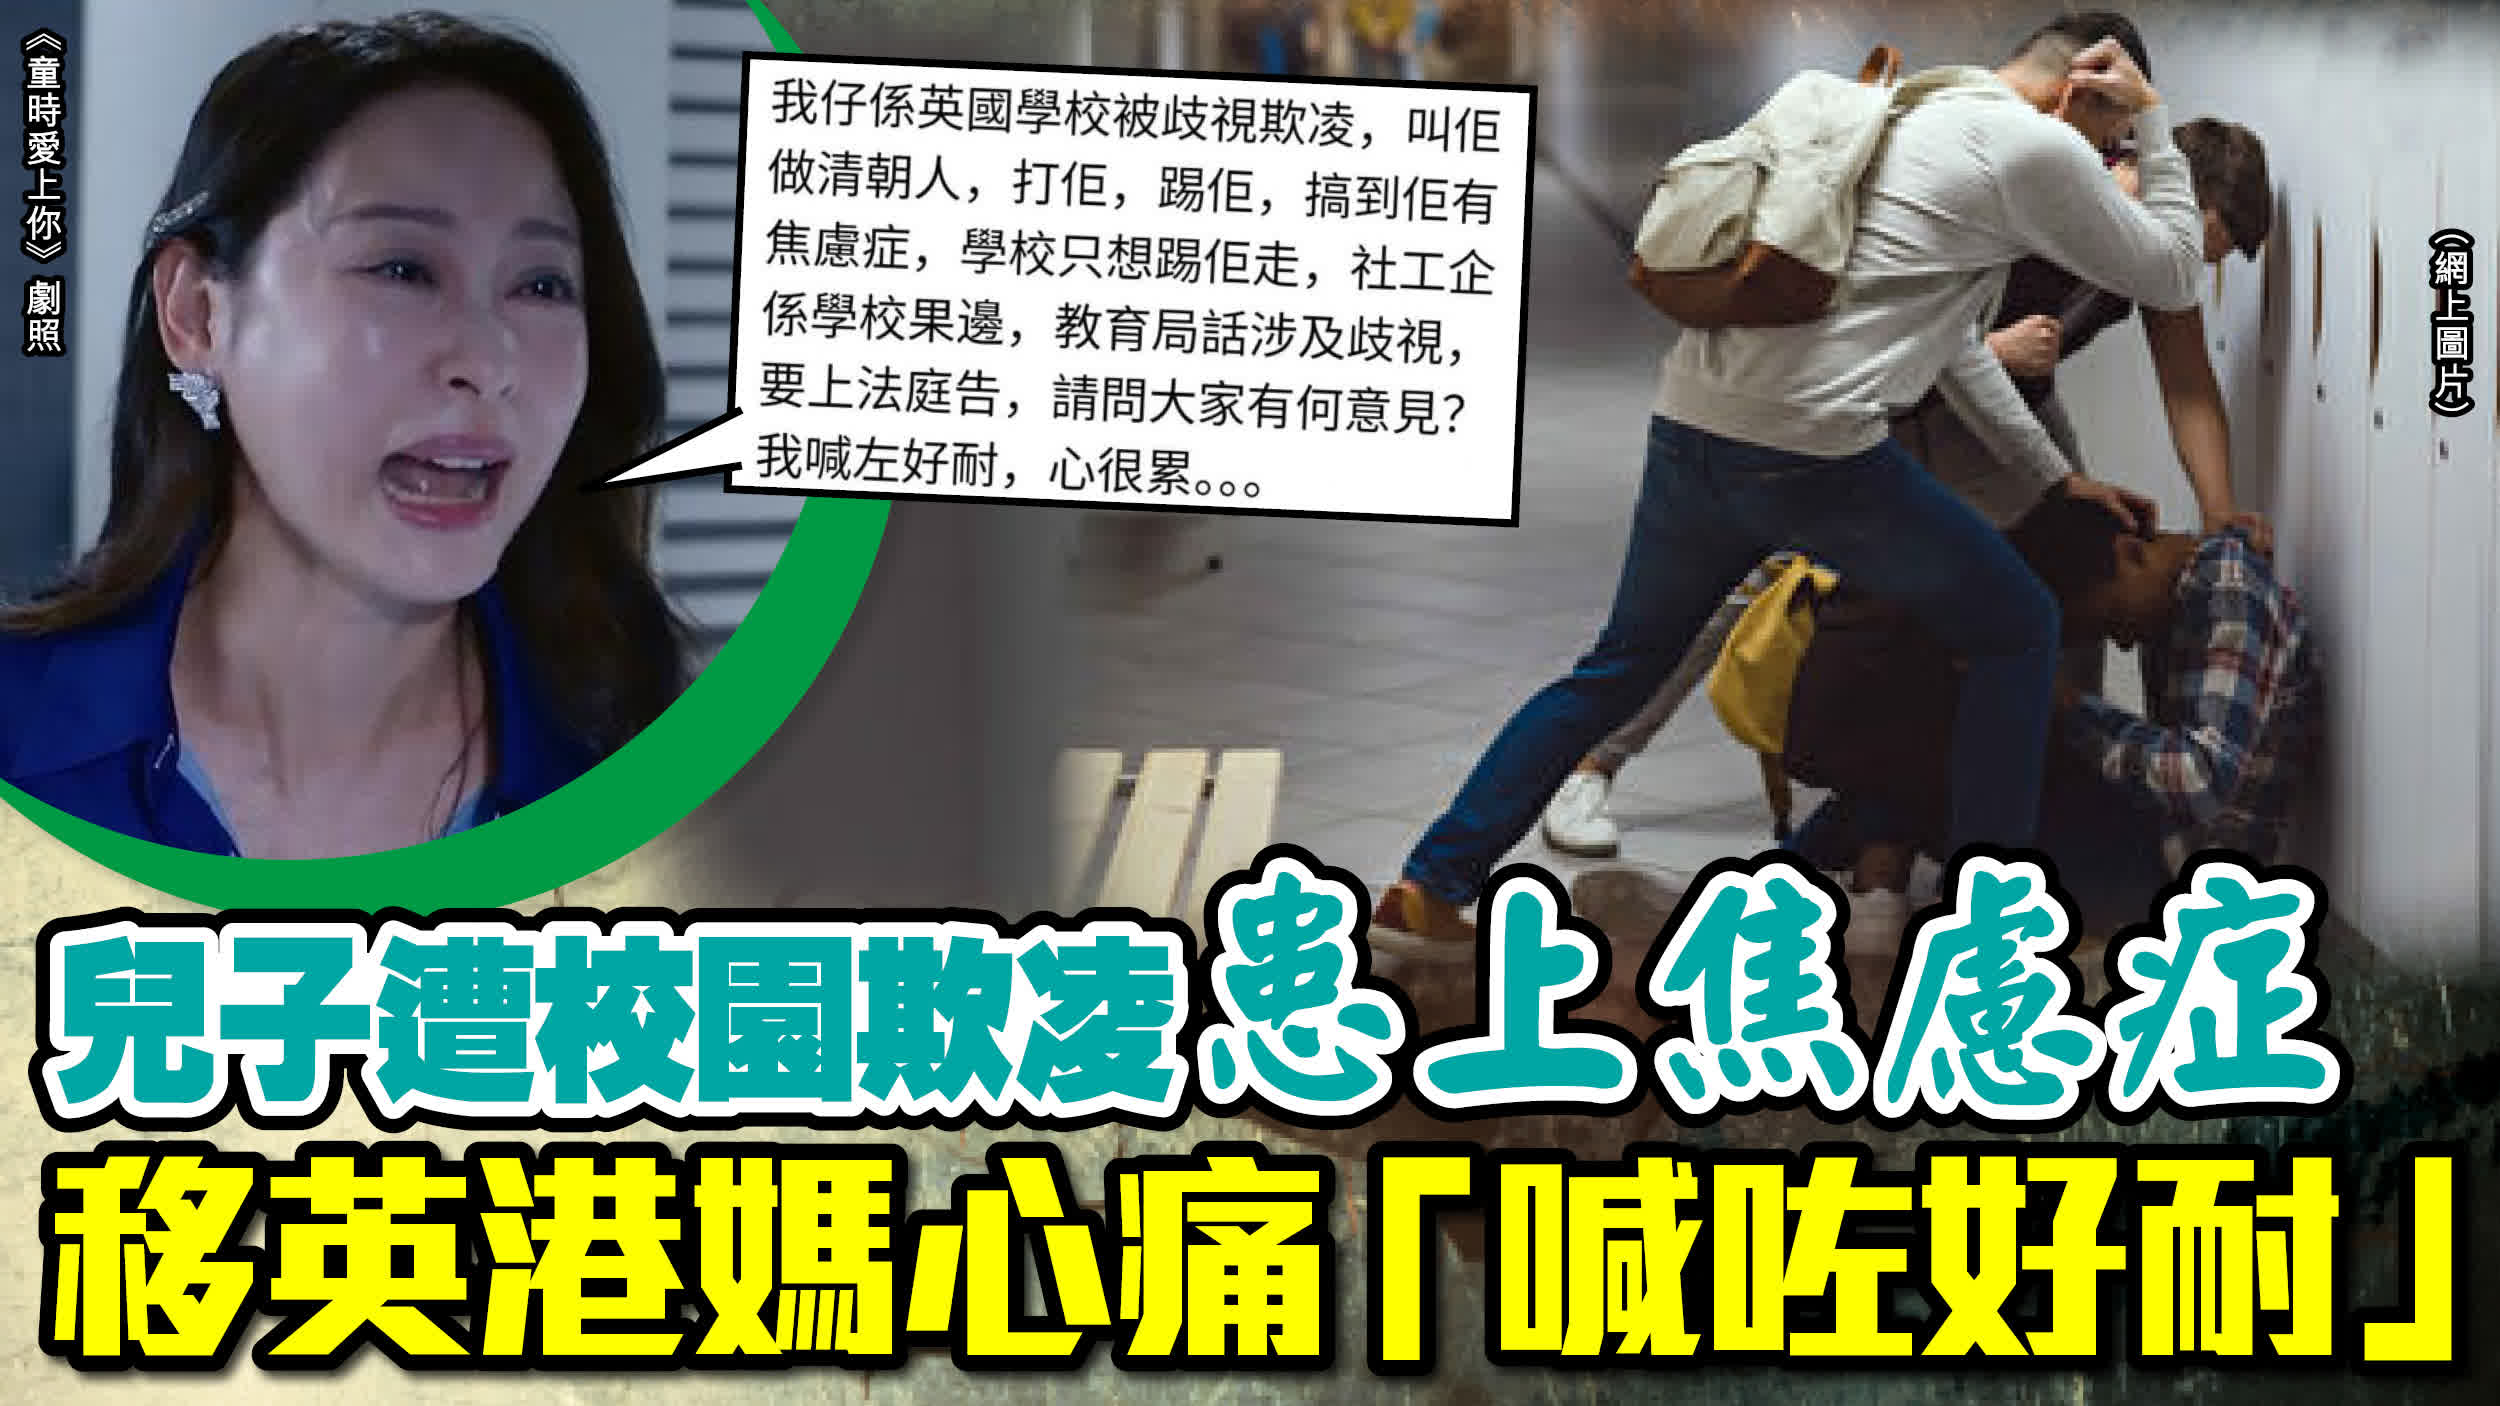  Yi Yinggang's Mother Exposes Her Son's Anxiety Caused by School Bullying